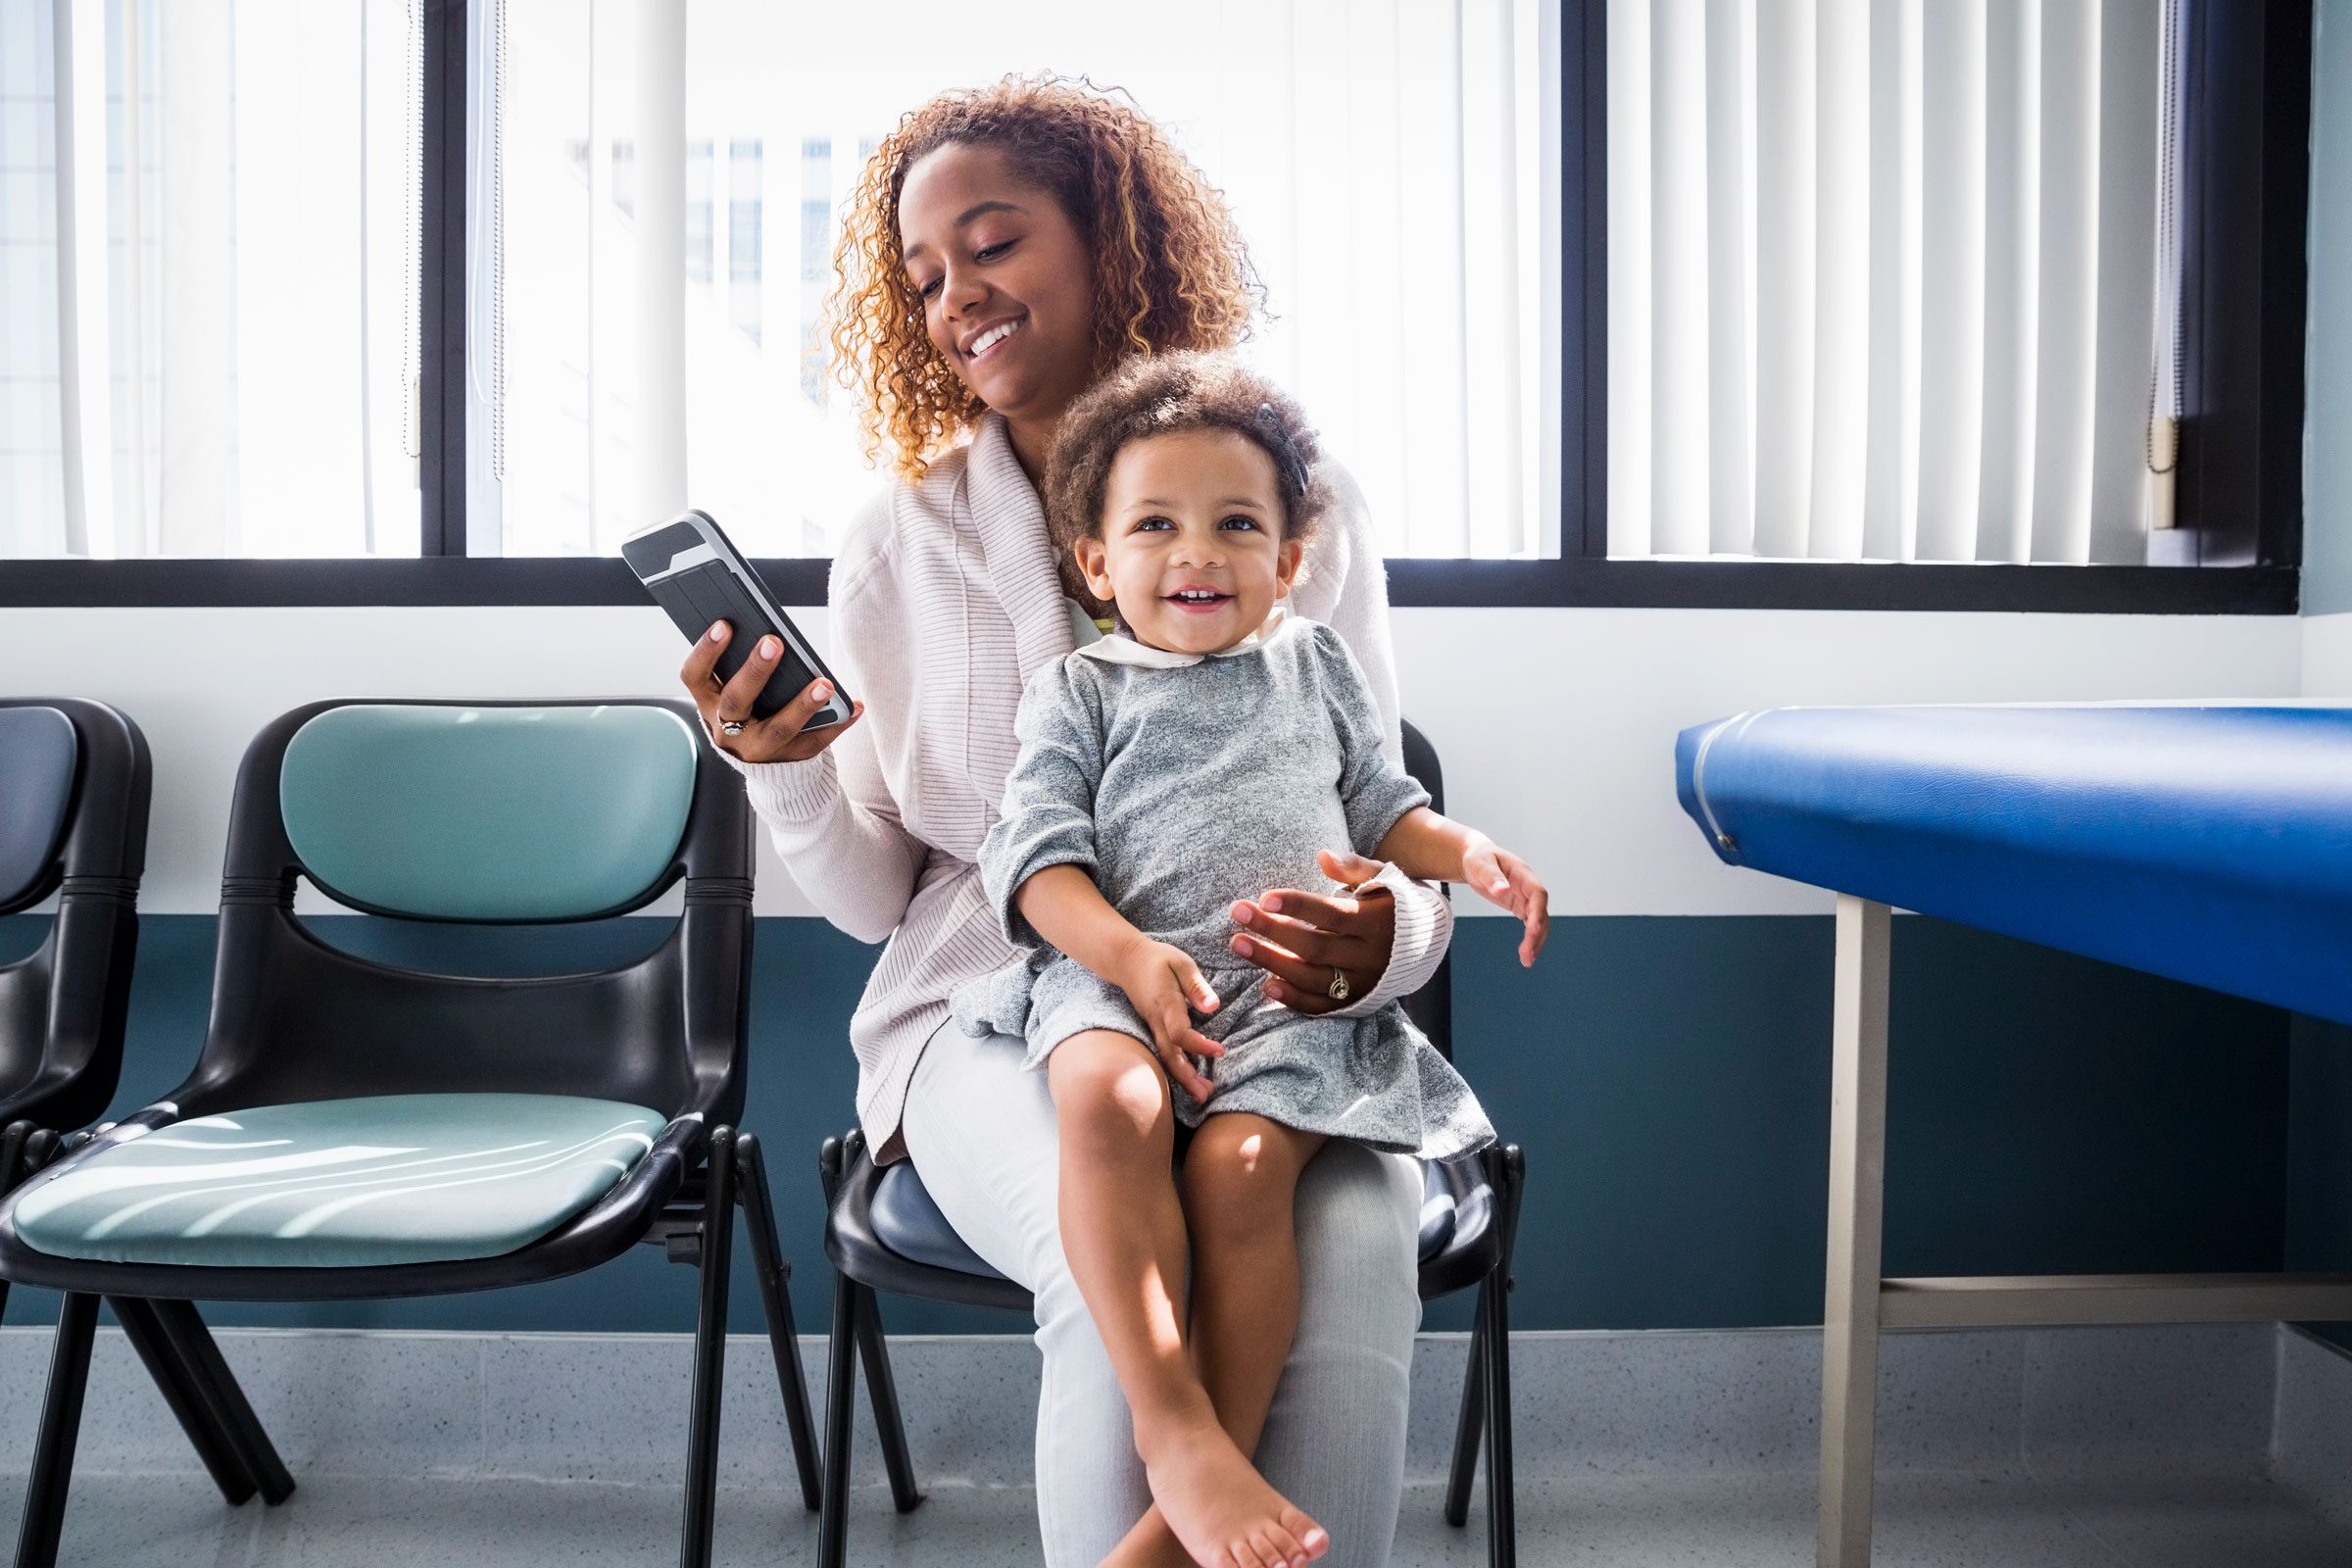 woman with kid talking on her phone while at the doctor's